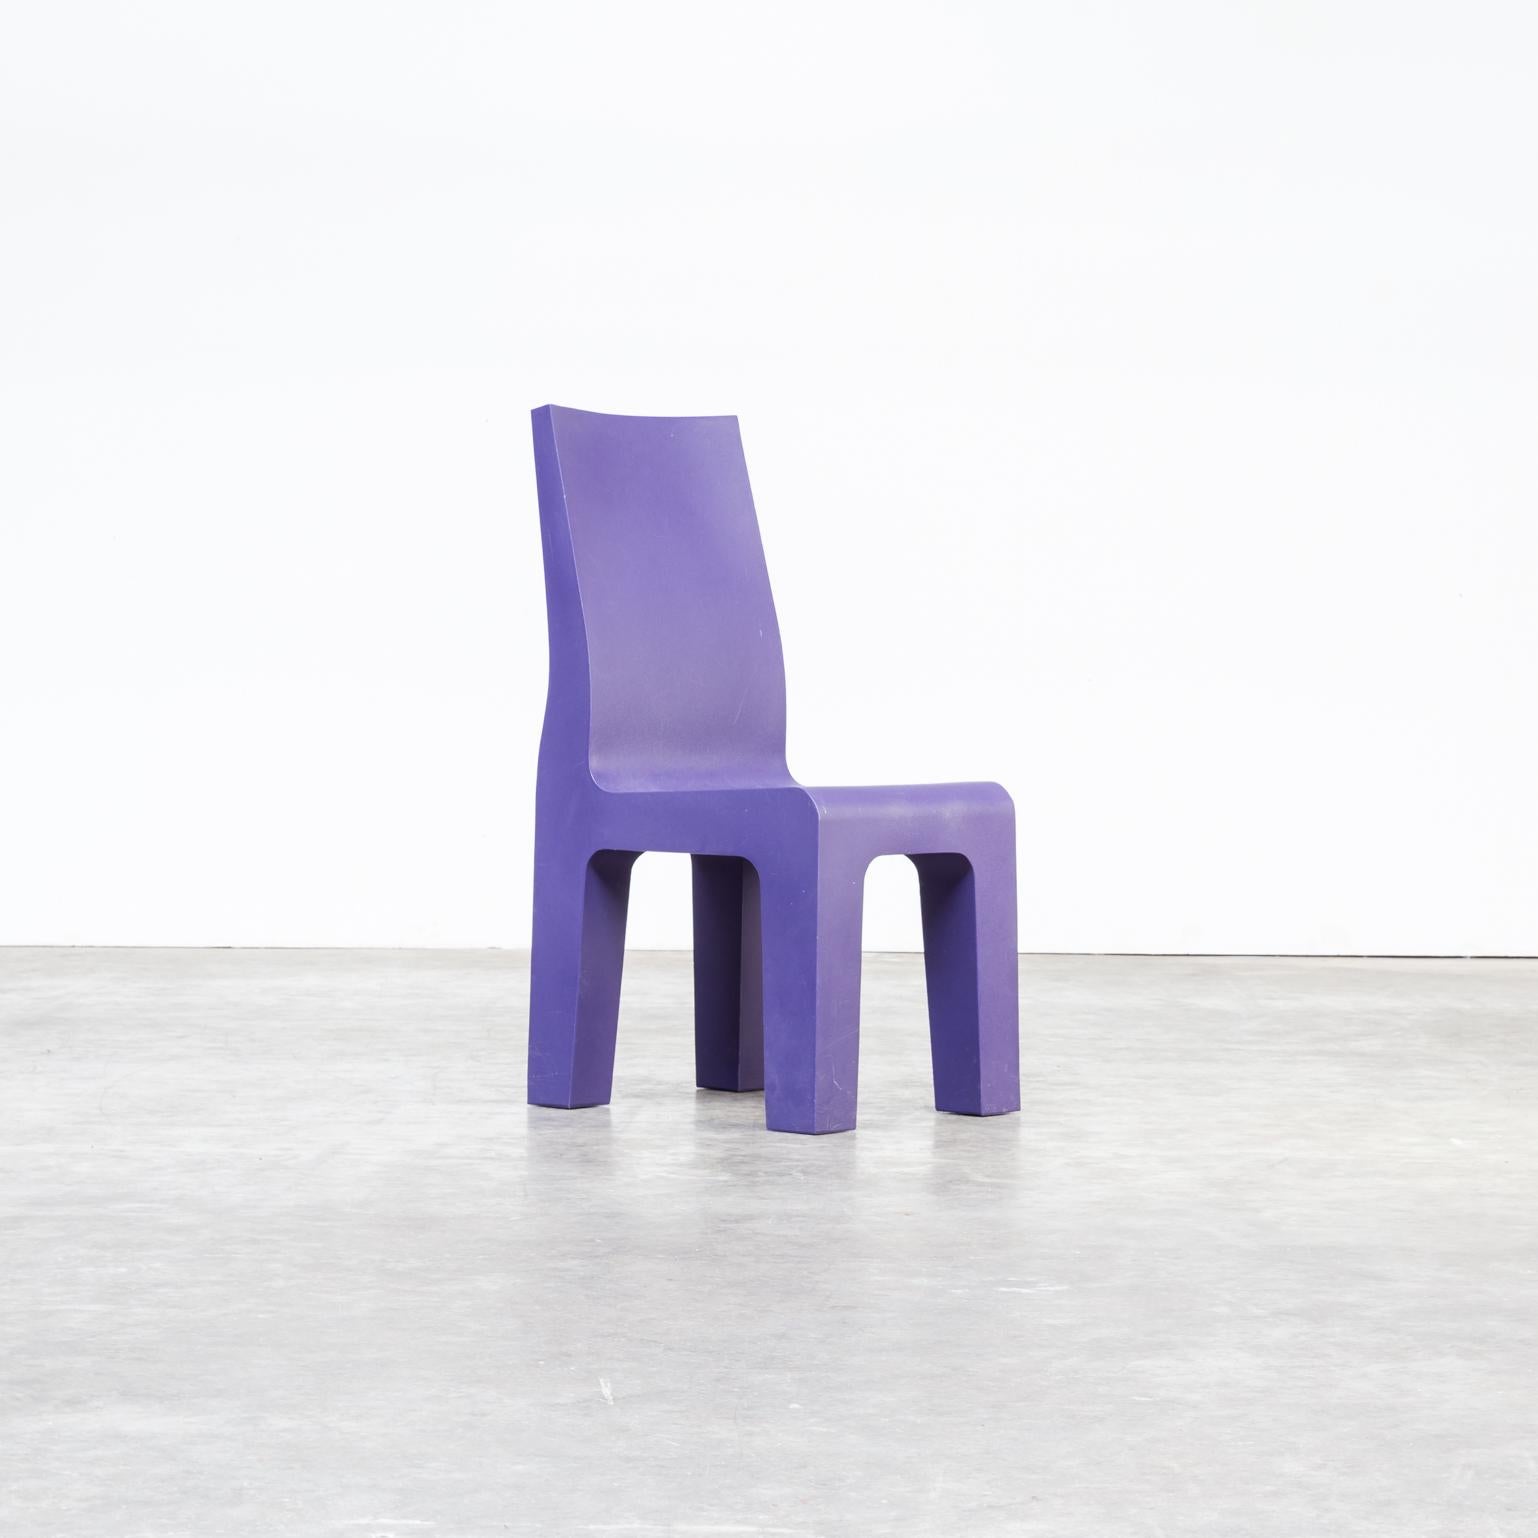 1990s Richard Hutten ‘Centraal Museum’ Chair for Gispen Set of Six For Sale 2